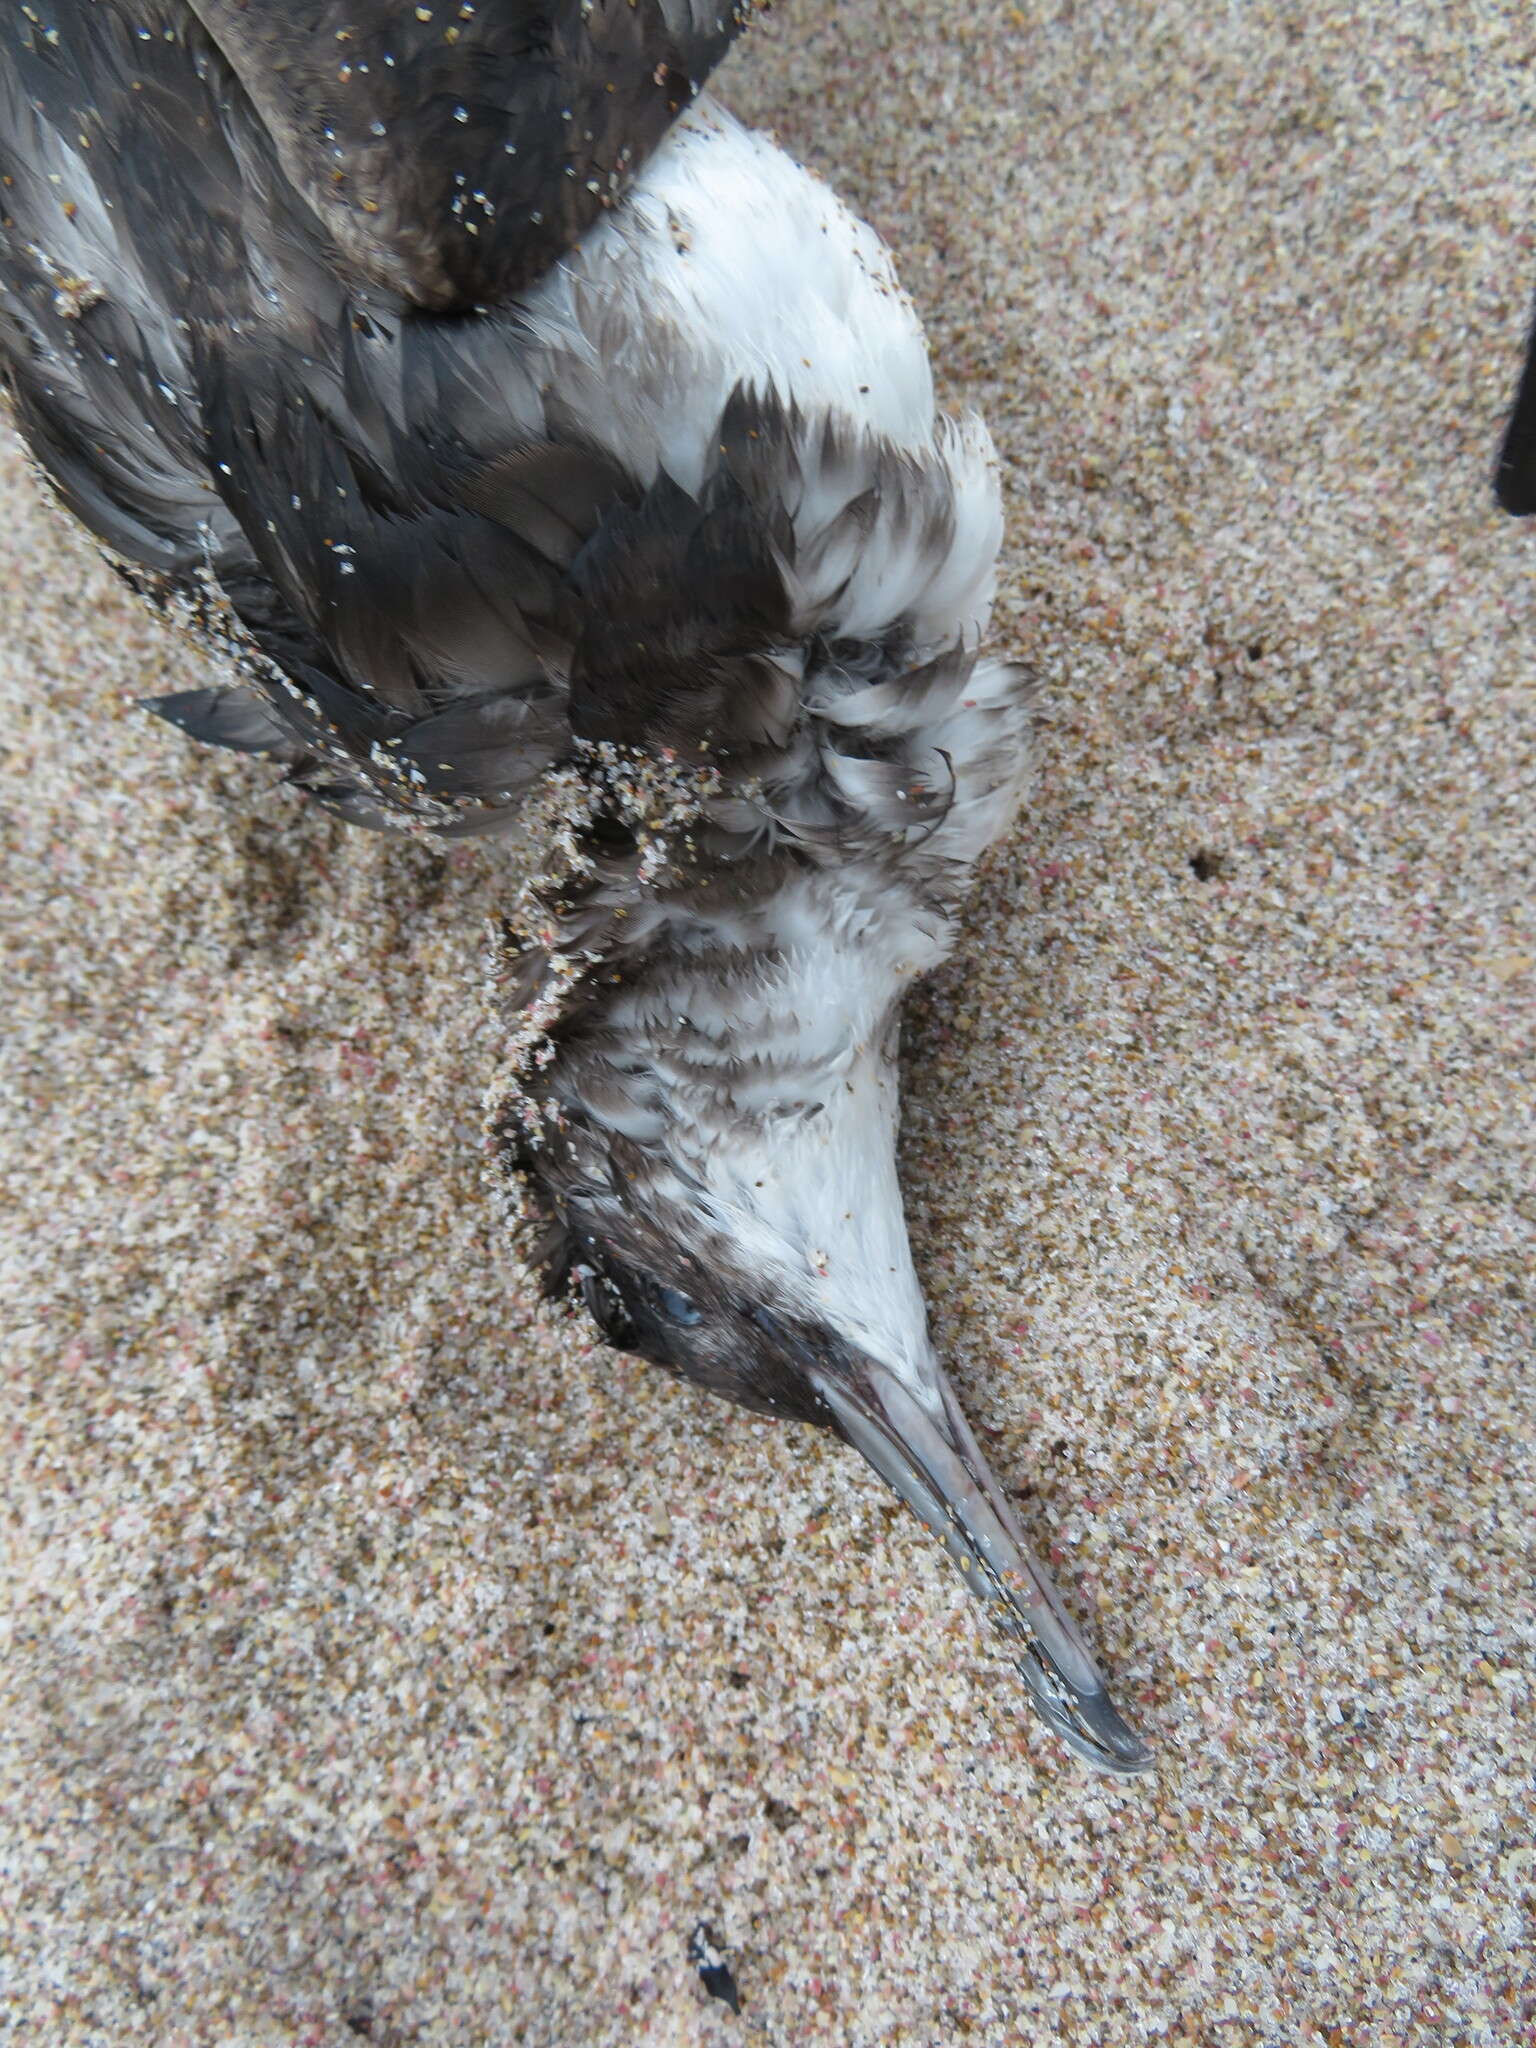 Image of Fluttering Shearwater